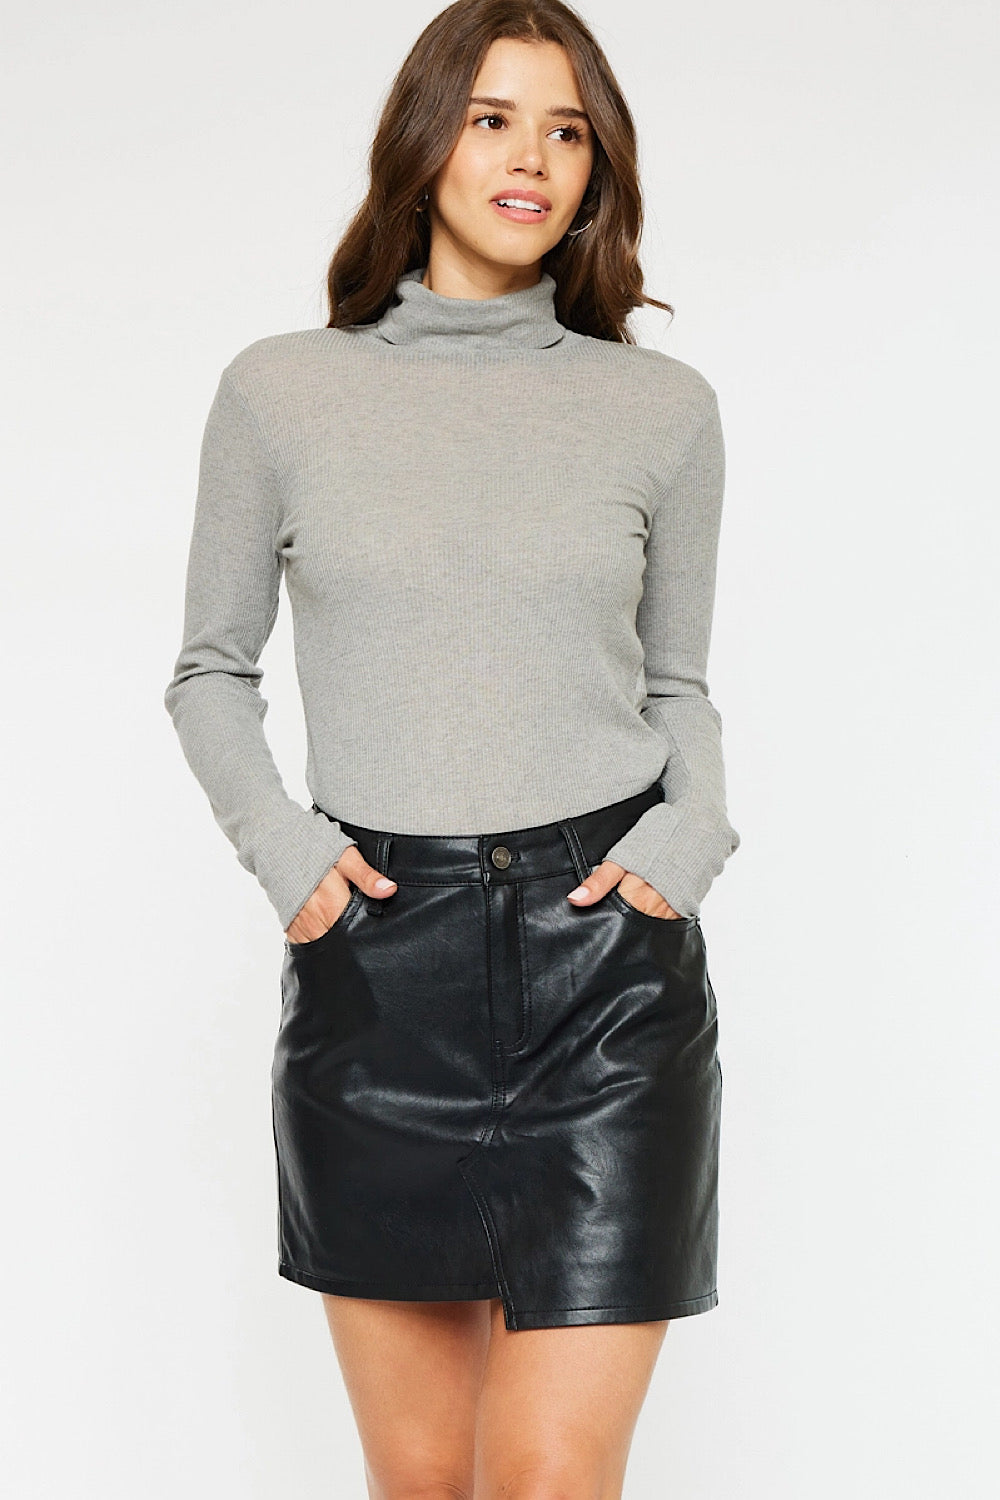 ASYMMETRICAL FAUX LEATHER MINI SKIRT – The Spruced Goose Boutique & Gifts